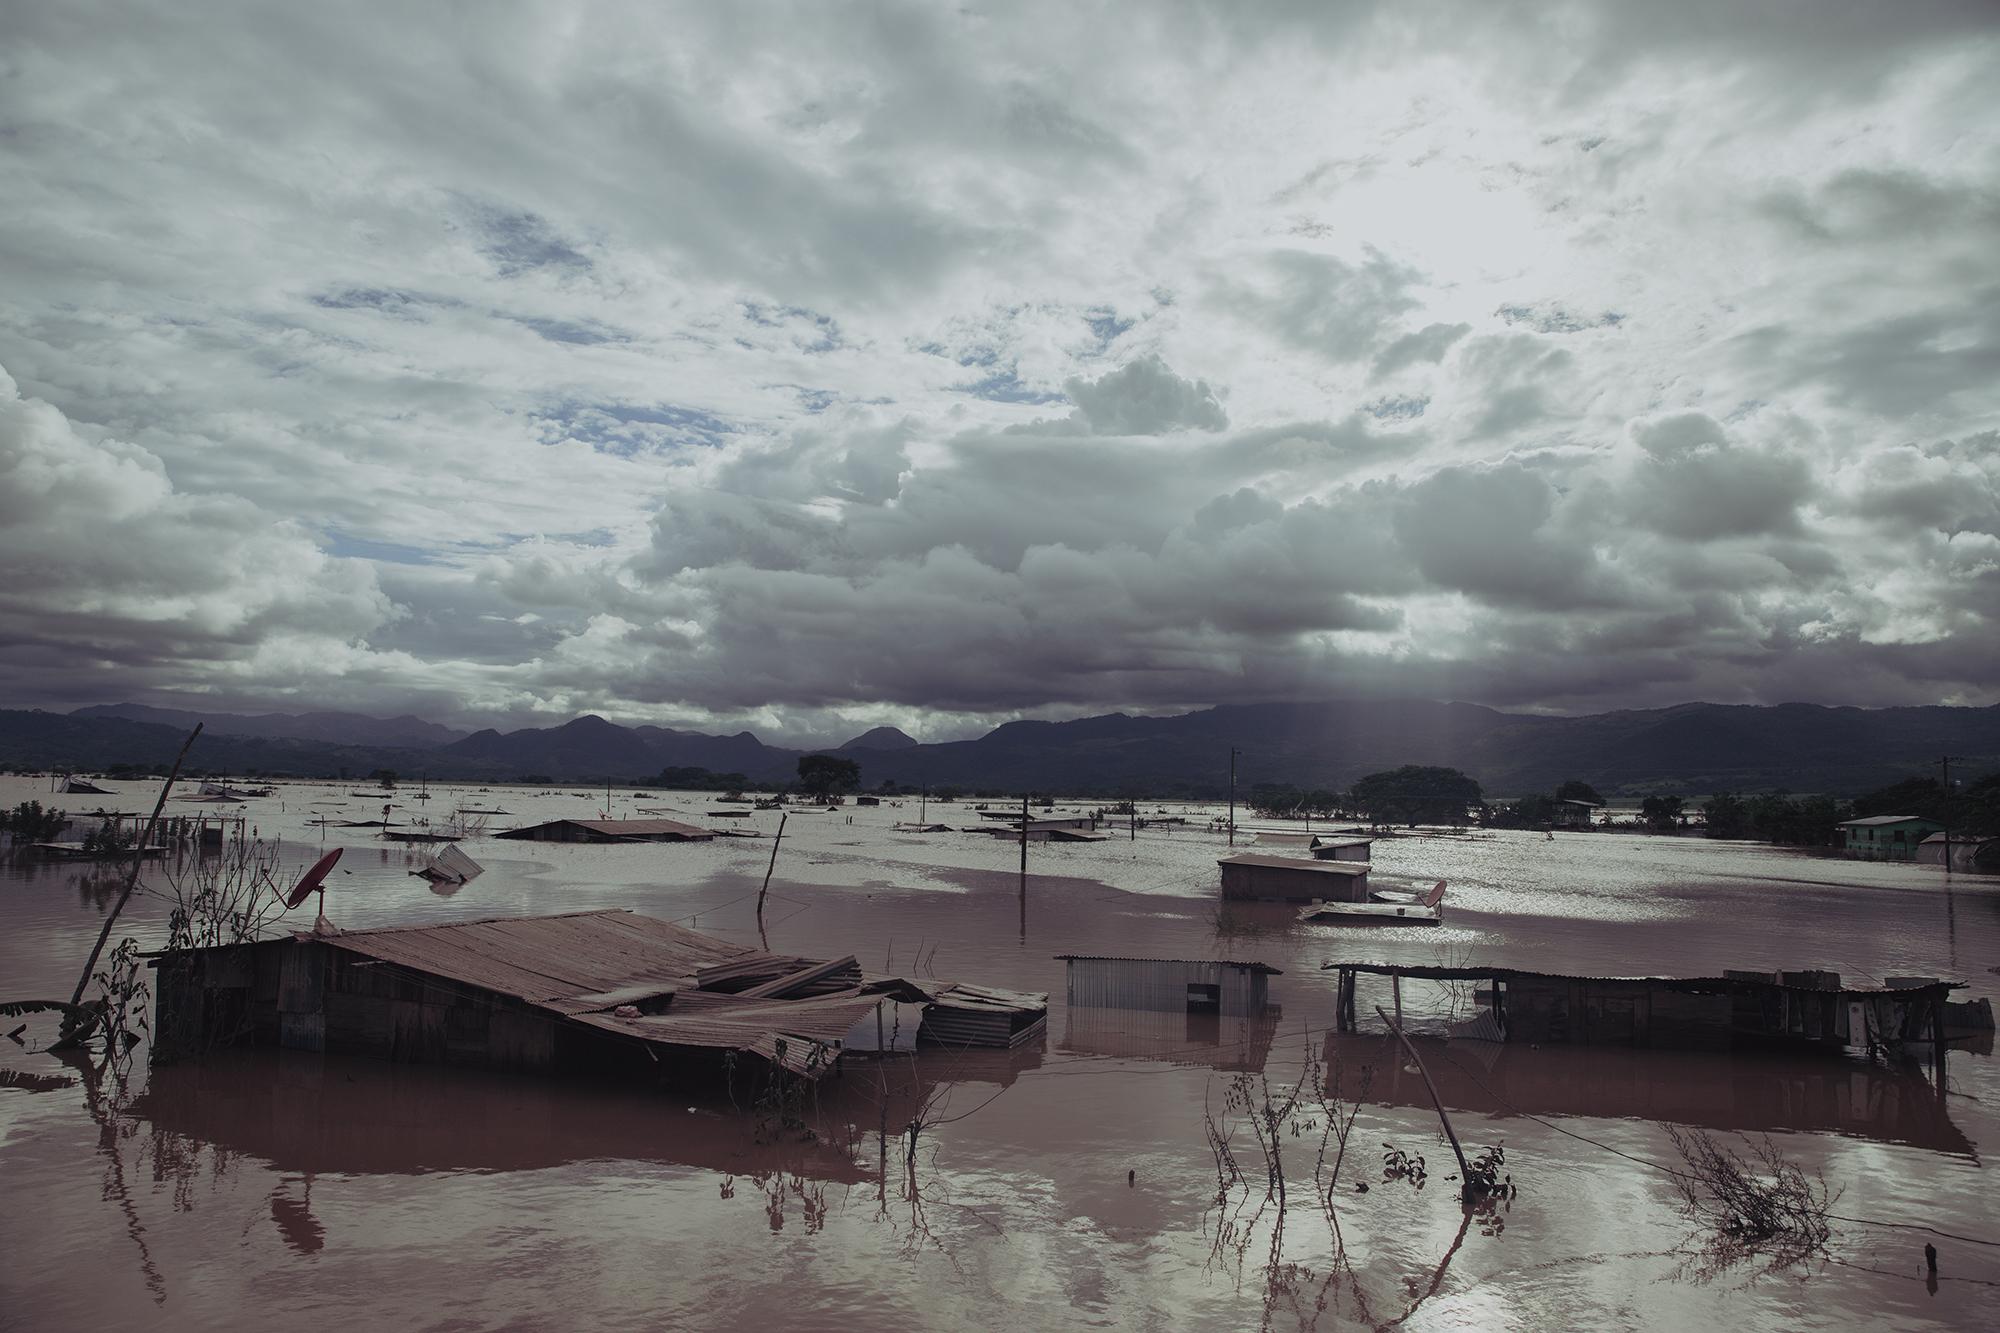 The Nueva Esperanza community in the municipality of Villanueva, Honduras, after rains from Hurricane Iota caused the Ulúa River to overflow its banks. Just a day earlier, the houses were completely submerged. November 19, 2020. Photo: Carlos Barrera/El Faro